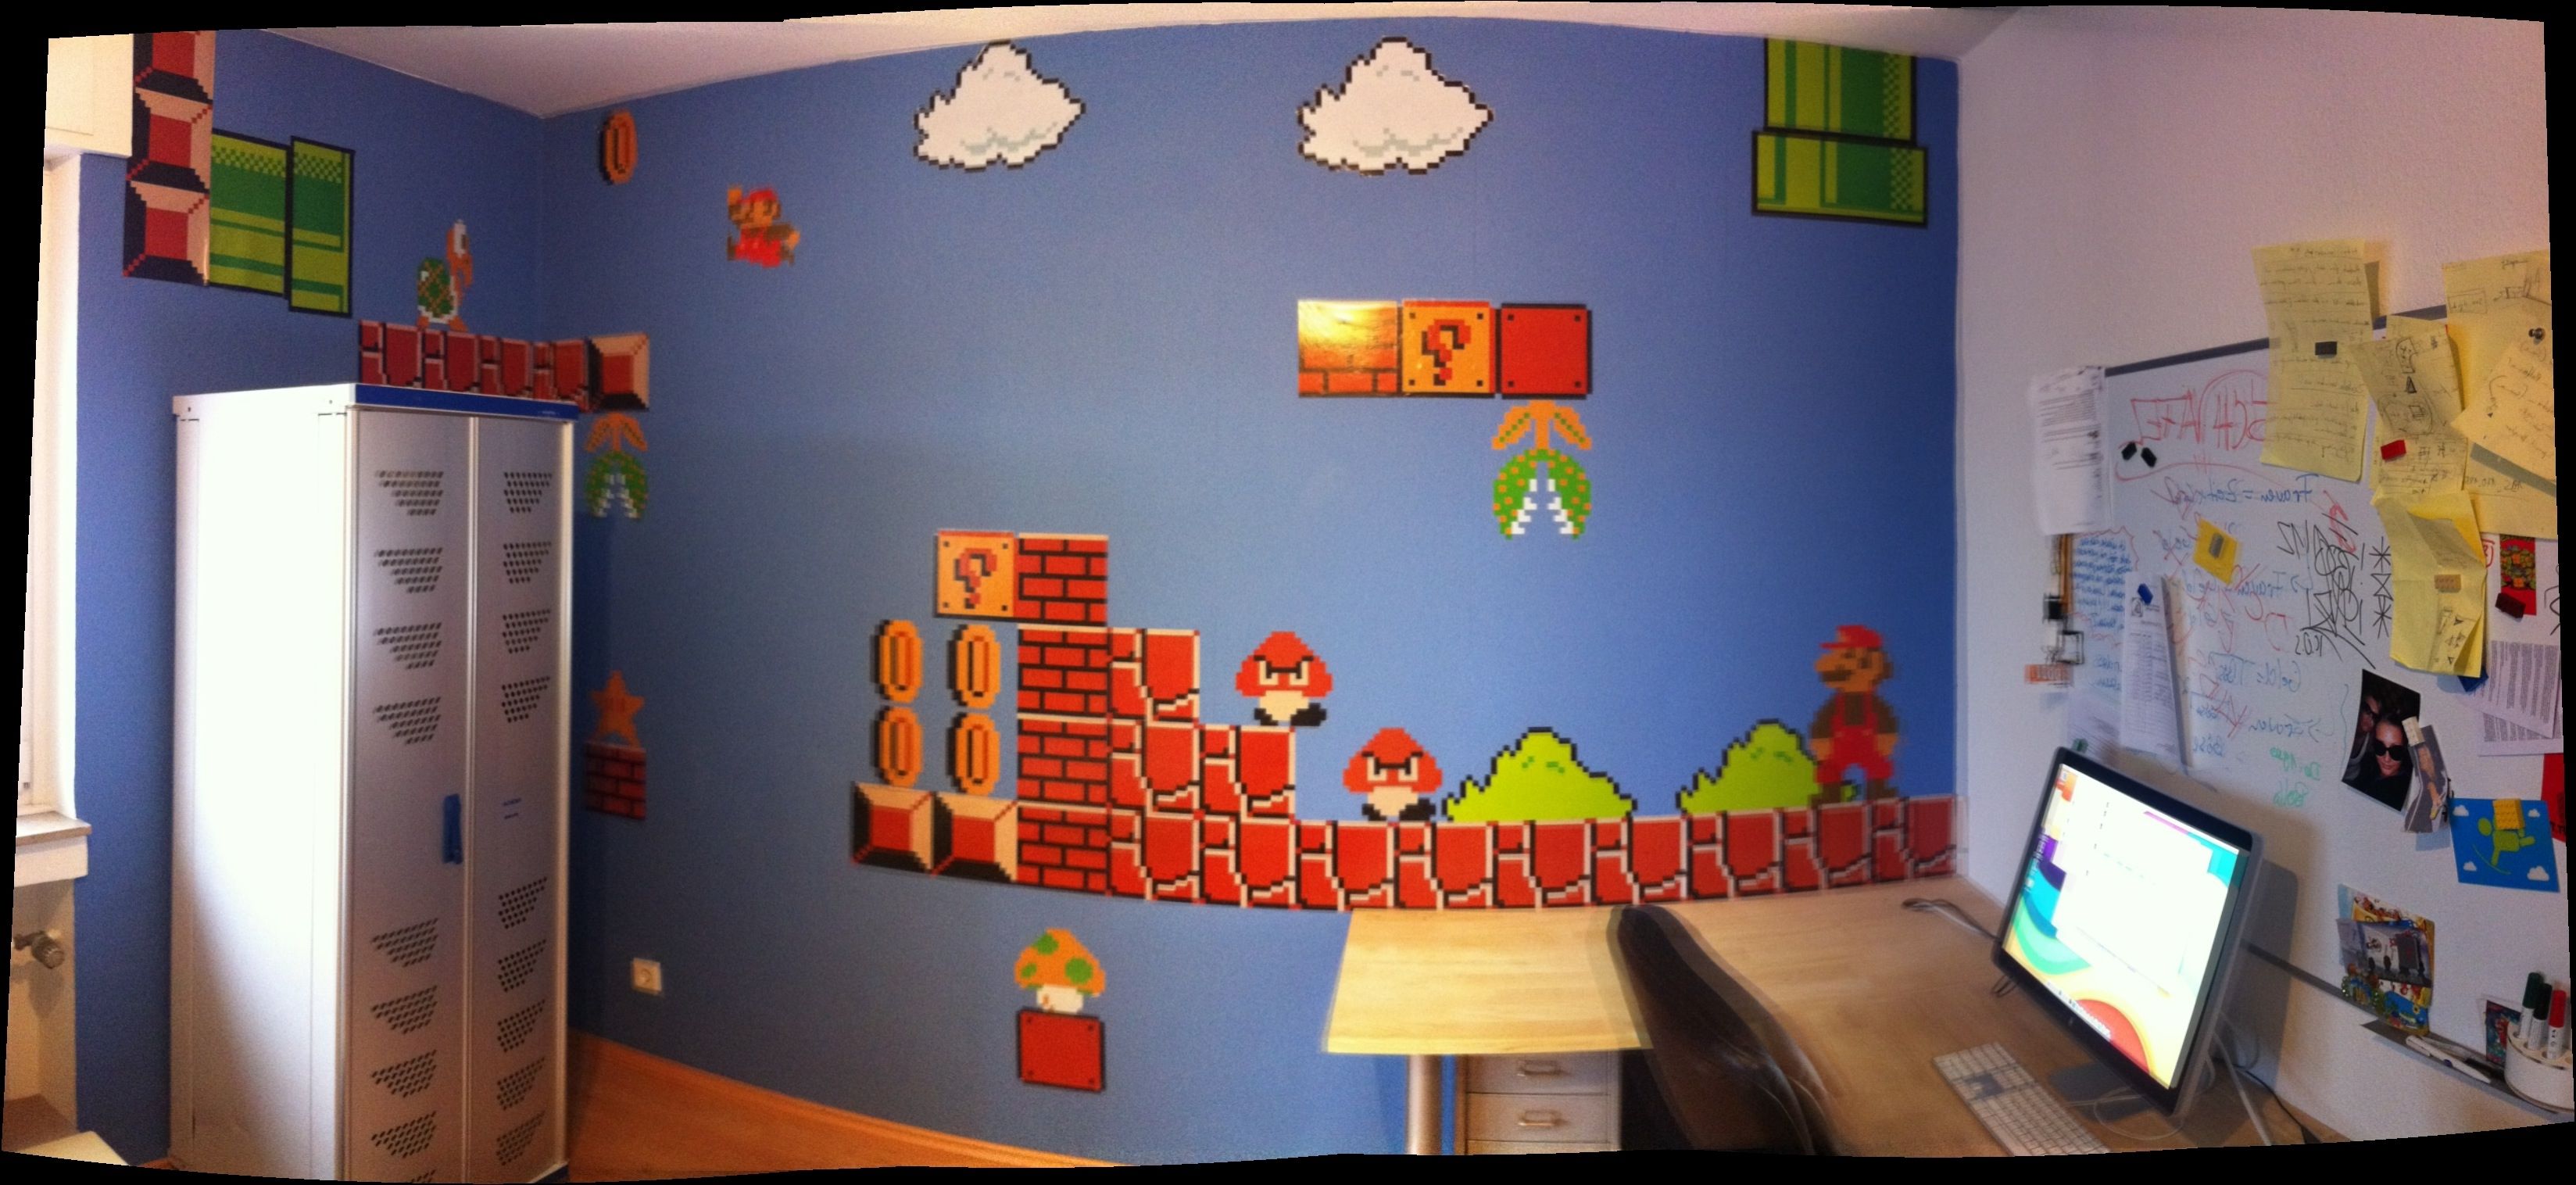 Arcade Wall Art In Well Known Mario Wall Stickers – Looking For Some Cool Mario Decorations? (View 9 of 15)